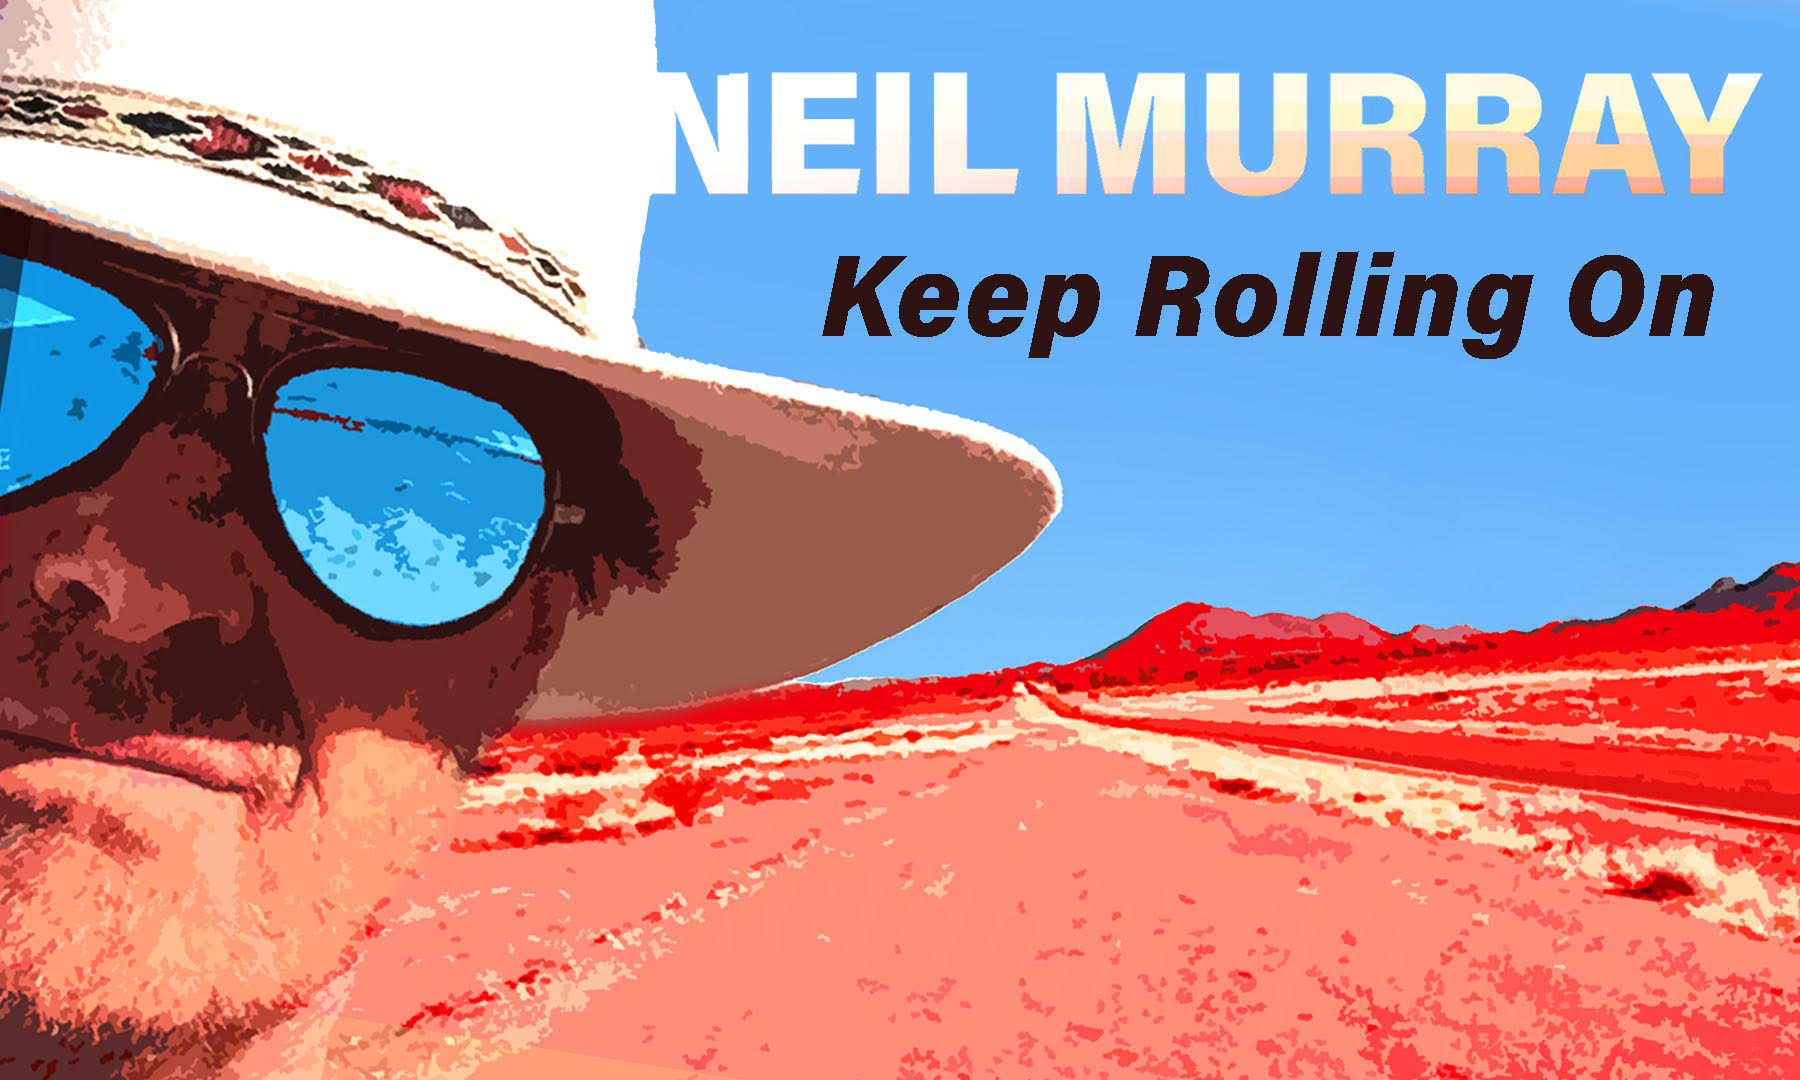 Neil Murray - Keep Rolling On